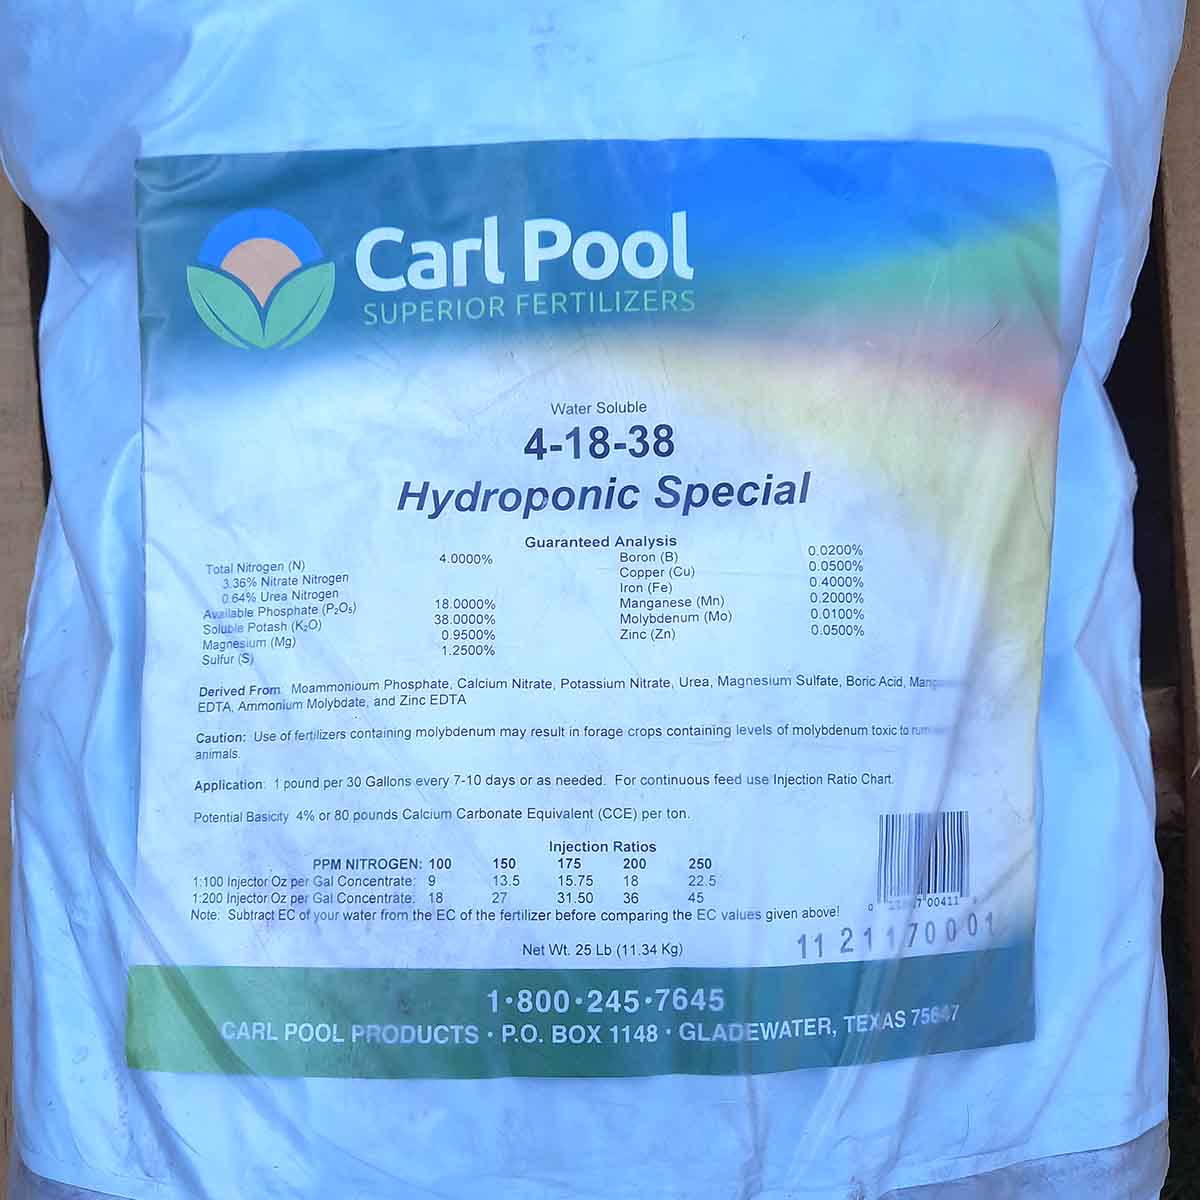 Carl Pool Hydroponic Special 4-18-38 Water Soluble Fertilizer